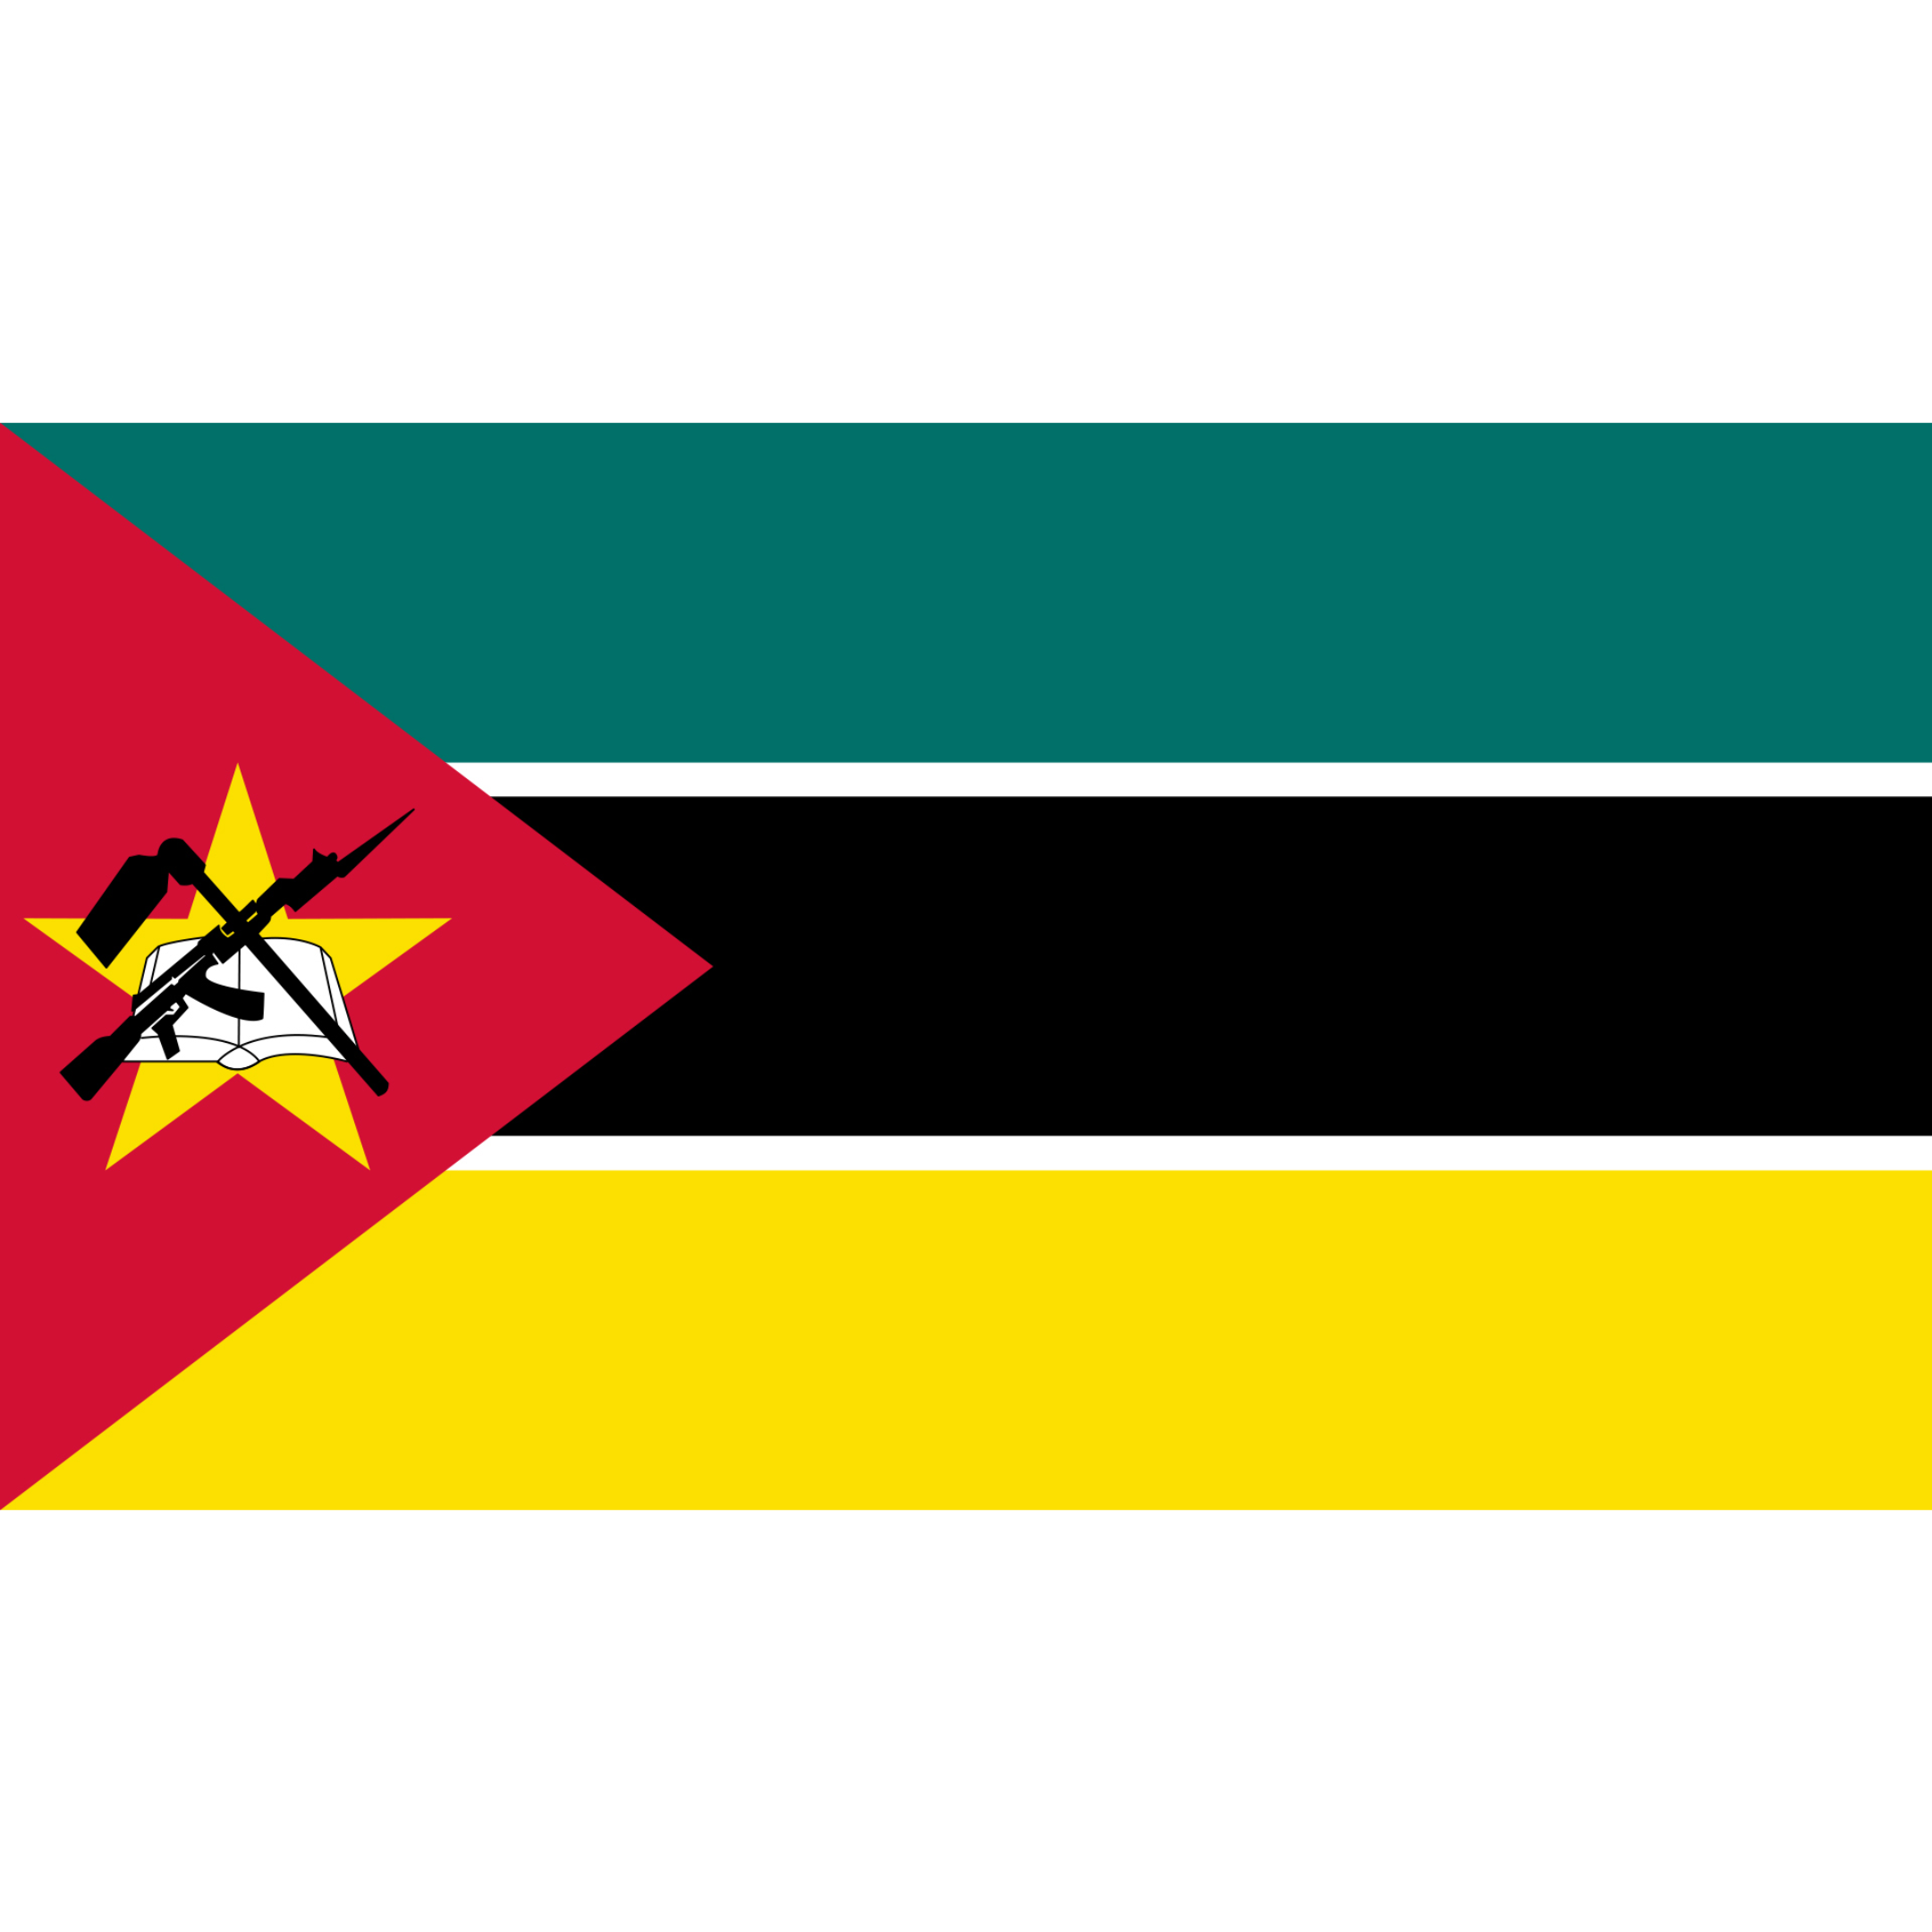 Mozambique's flag has 3 horizontal teal, white-edged black and yellow bands and a red triangle on the left with an emblem.